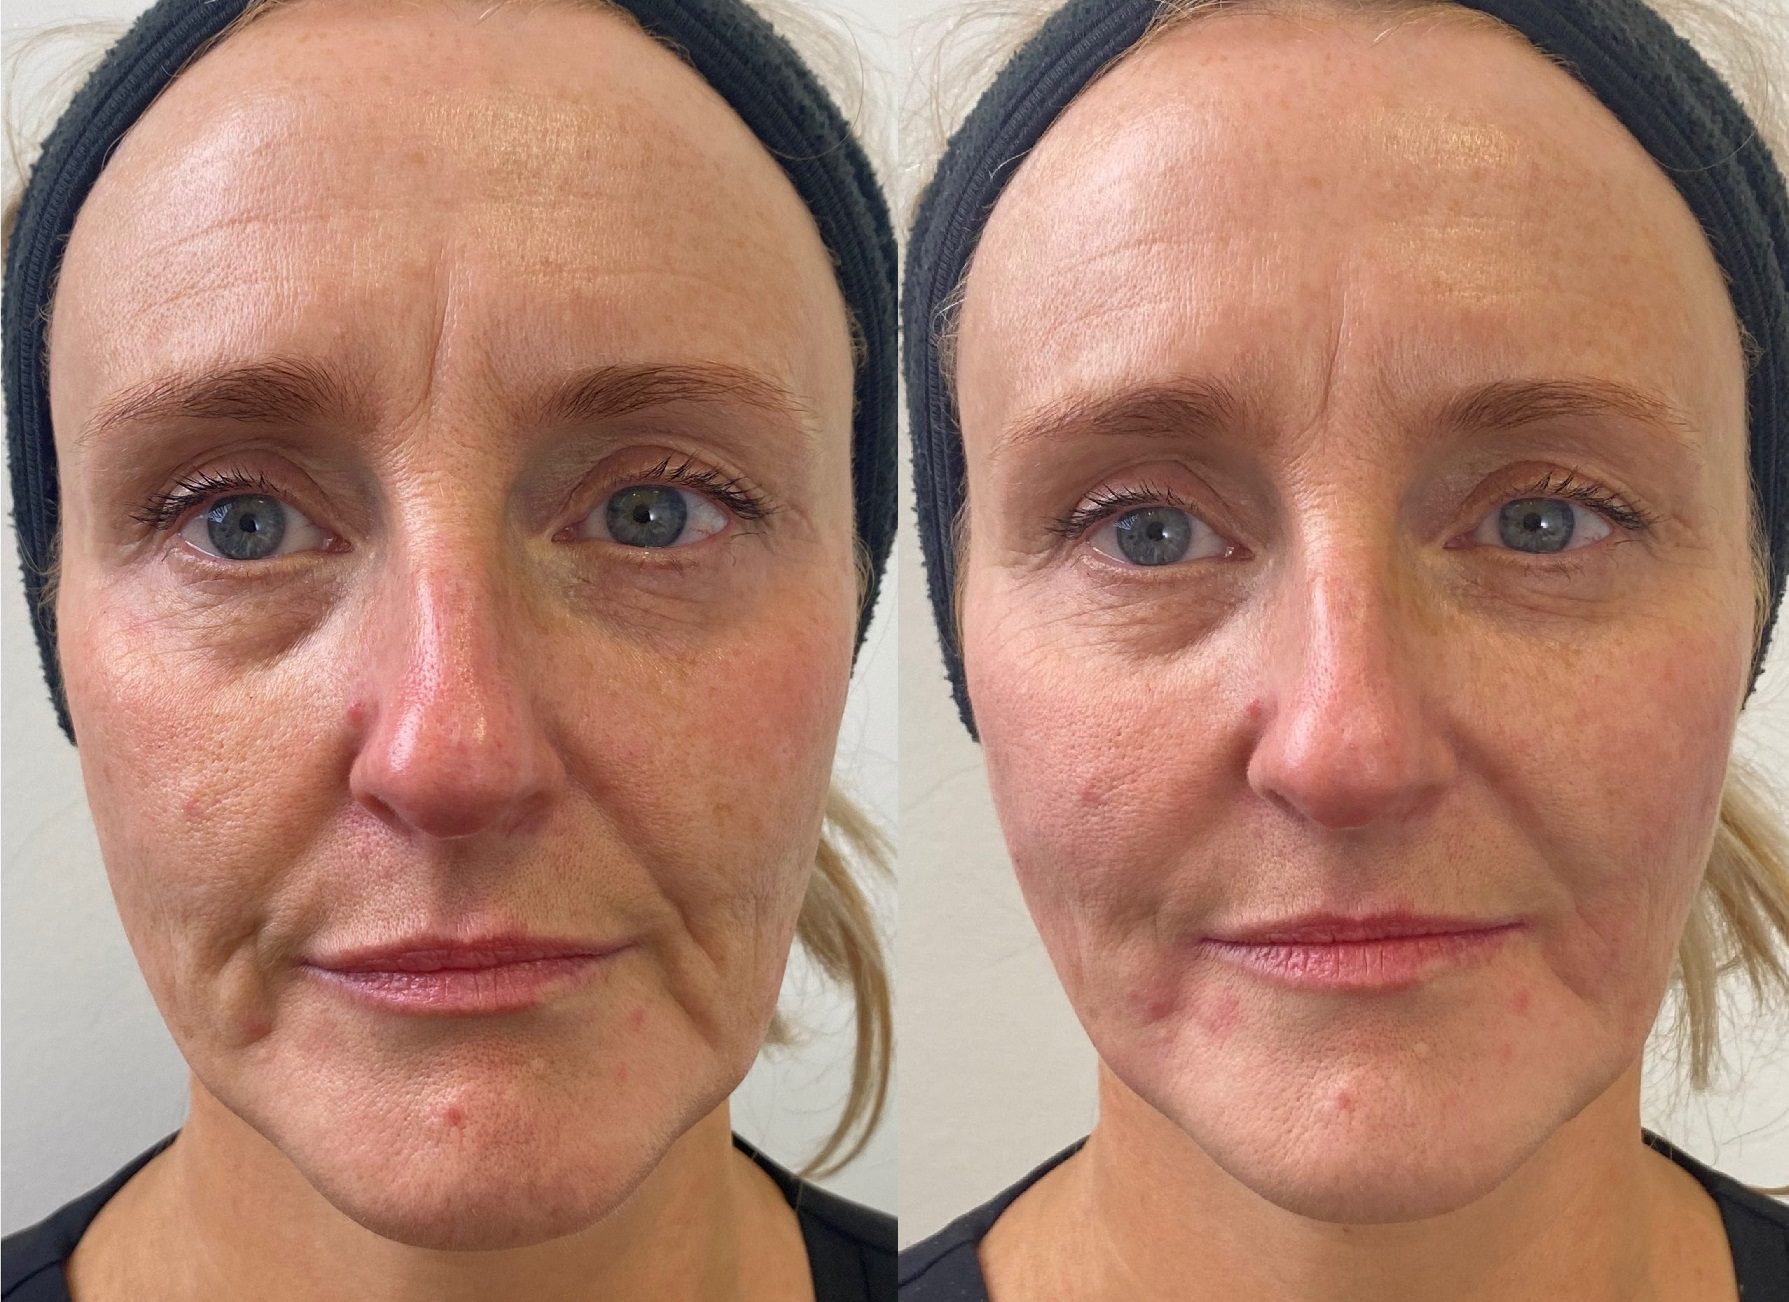 Lower Face Lift Dermal Fillers Before and After by Dr Johanna Ward